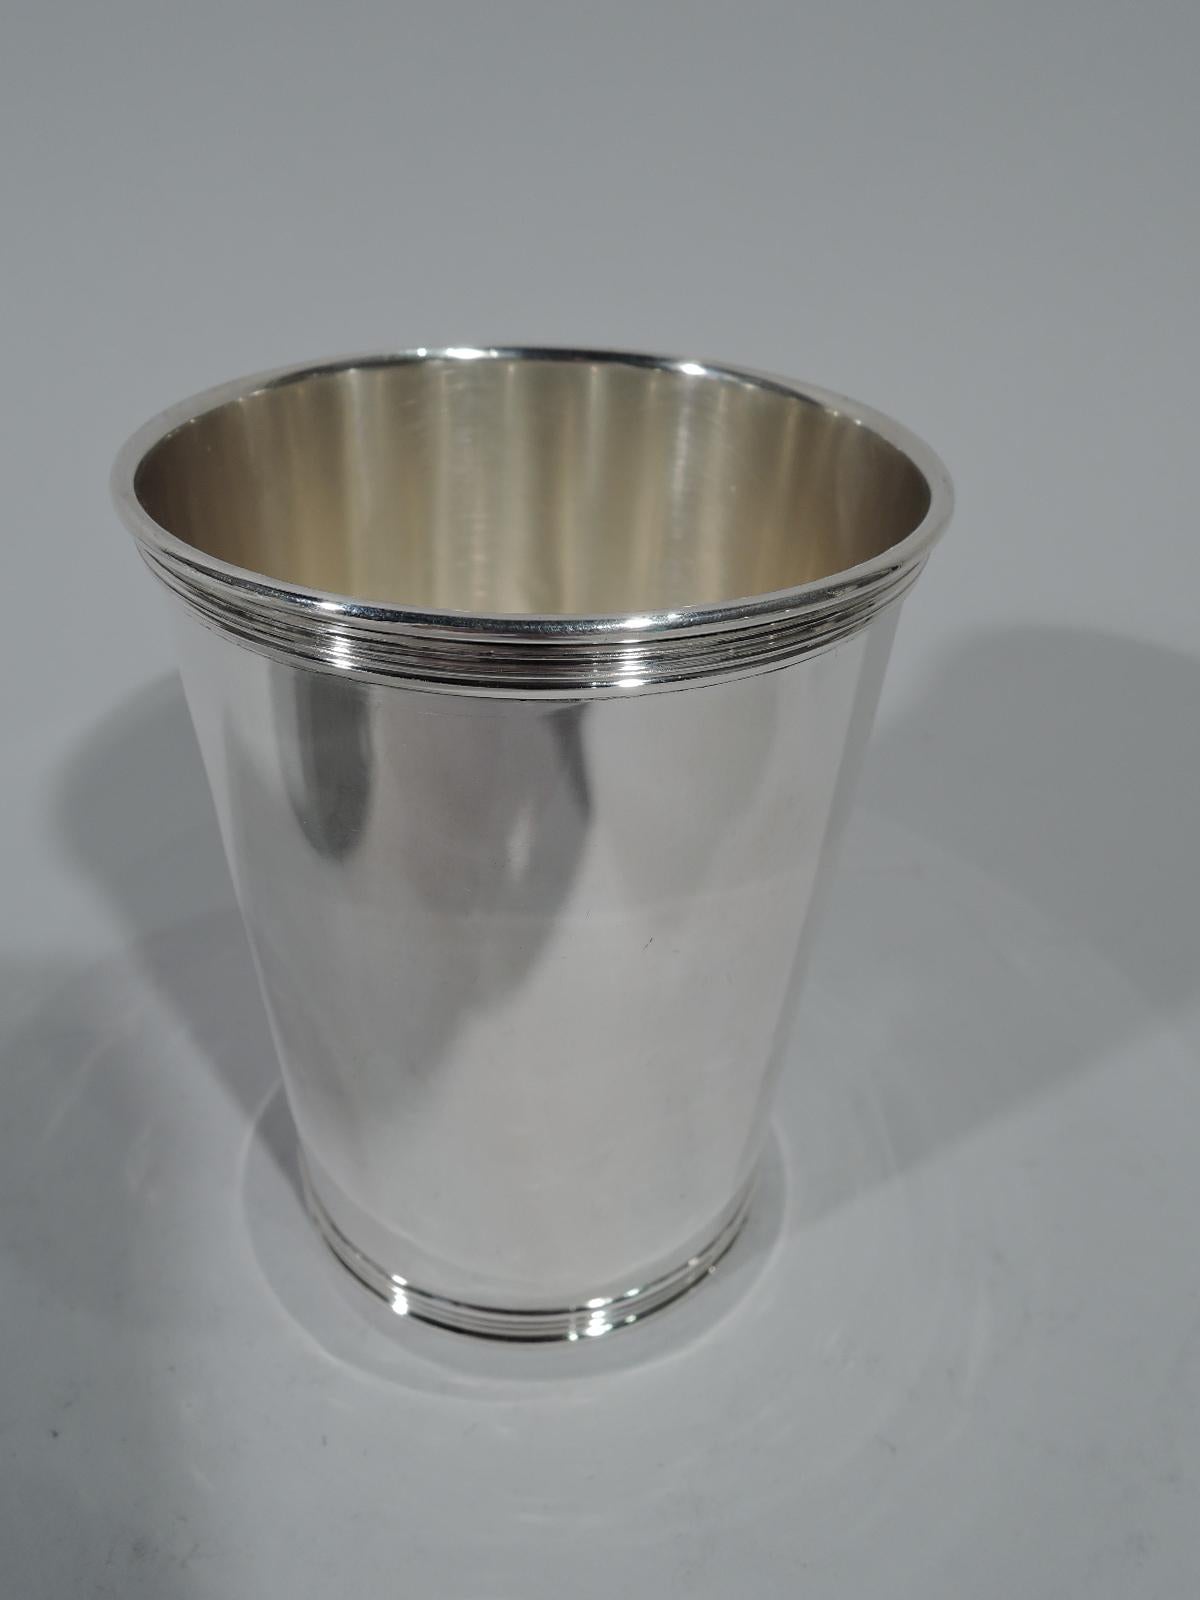 Set of 12 sterling silver mint julep cups. Made by Manchester Silver Co. in Providence. Each: Straight and tapering sides and reeded rim and foot. Hallmark includes no. 3759. Total weight: 46.5 troy ounces.